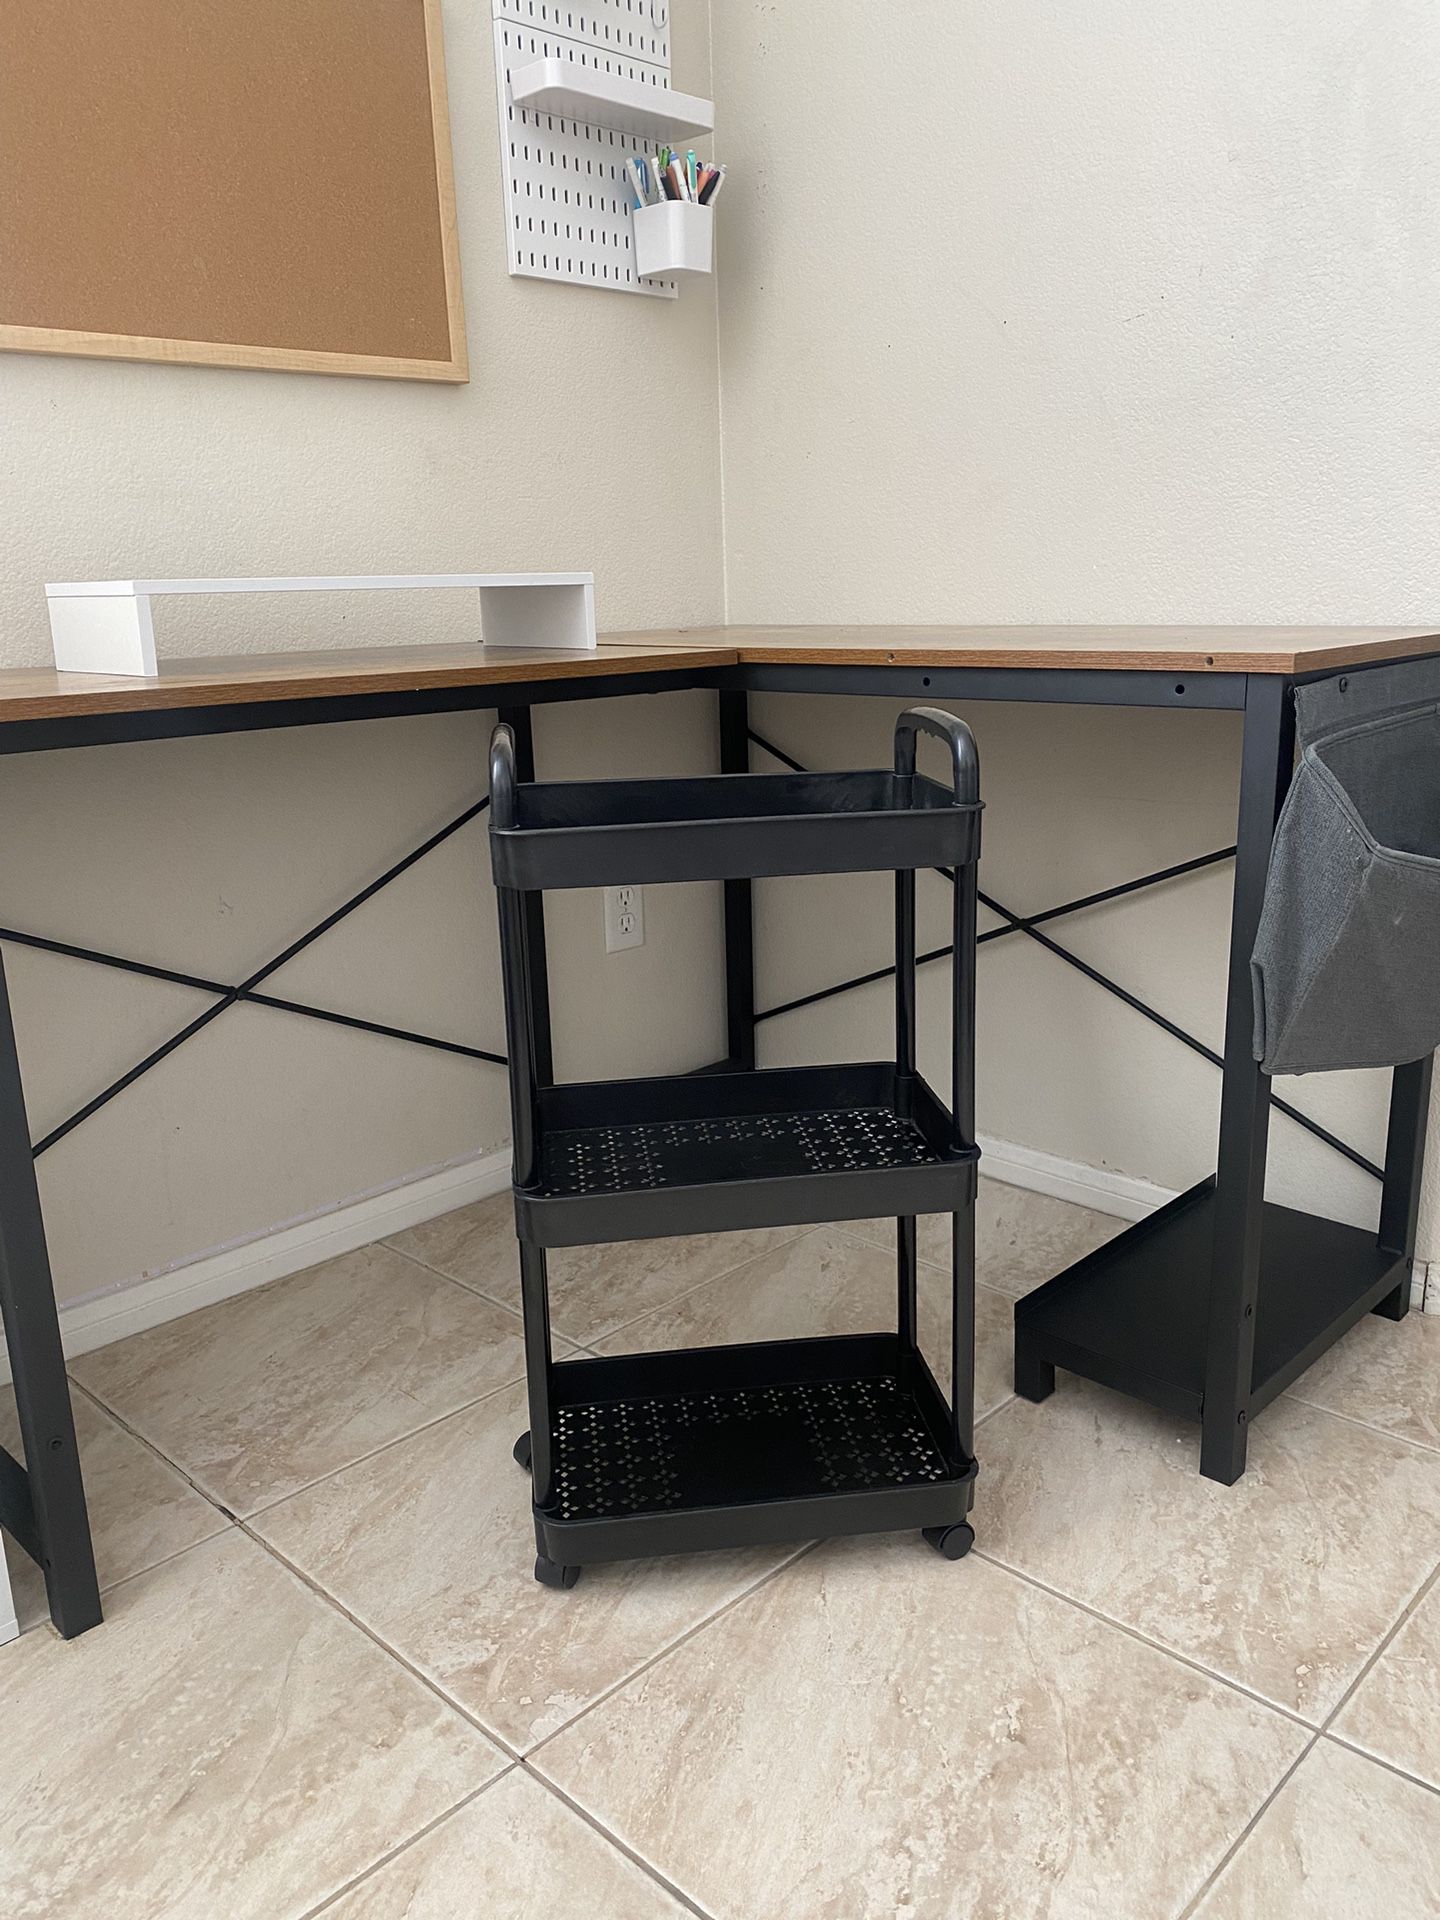 3 Tiered Black Utility Rolling Cart